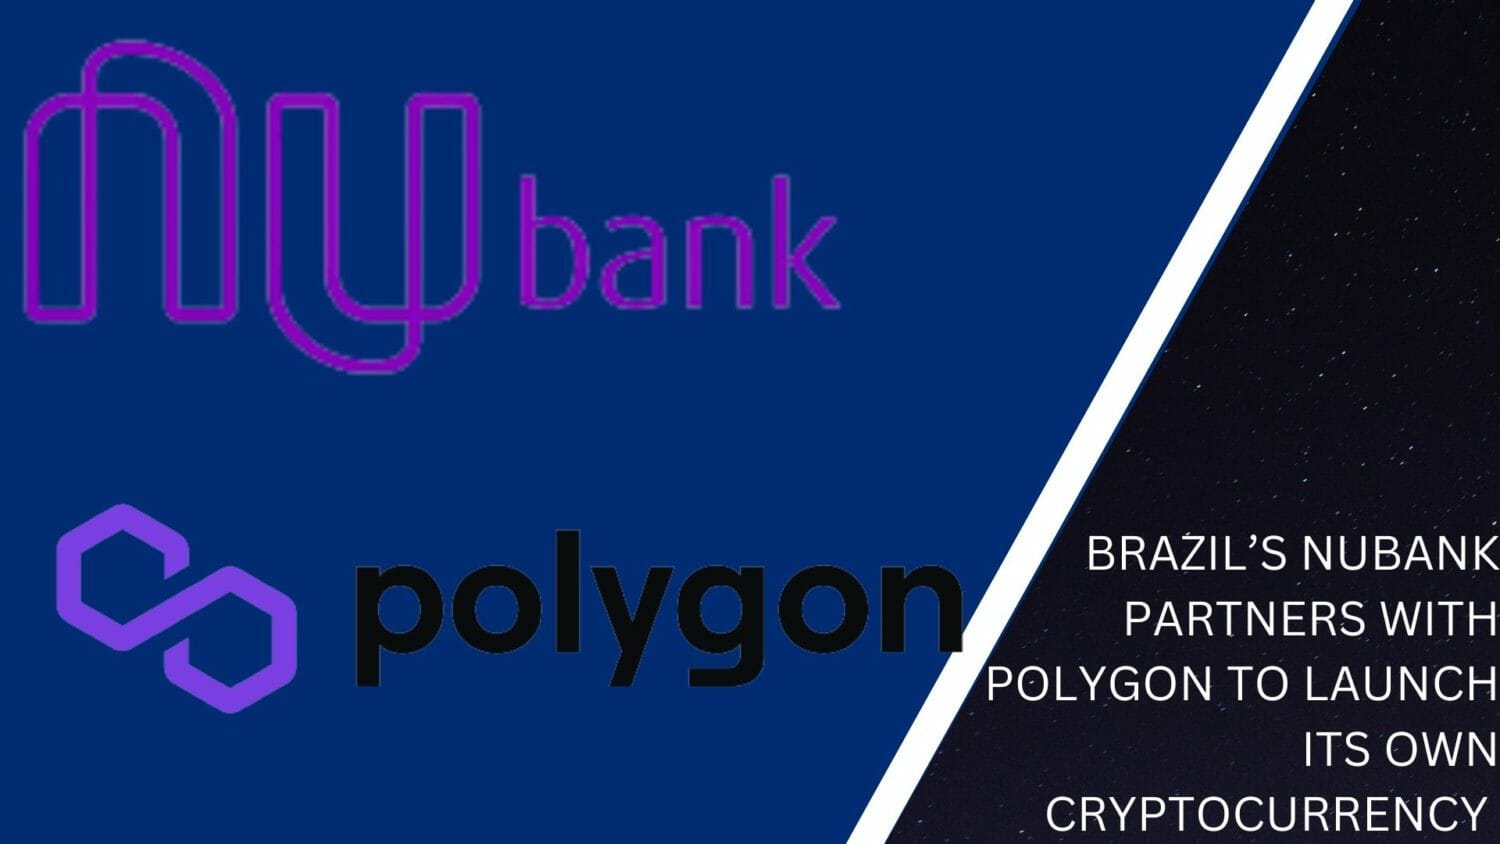 Brazil’s Nubank Partners With Polygon To Launch Its Own Cryptocurrency